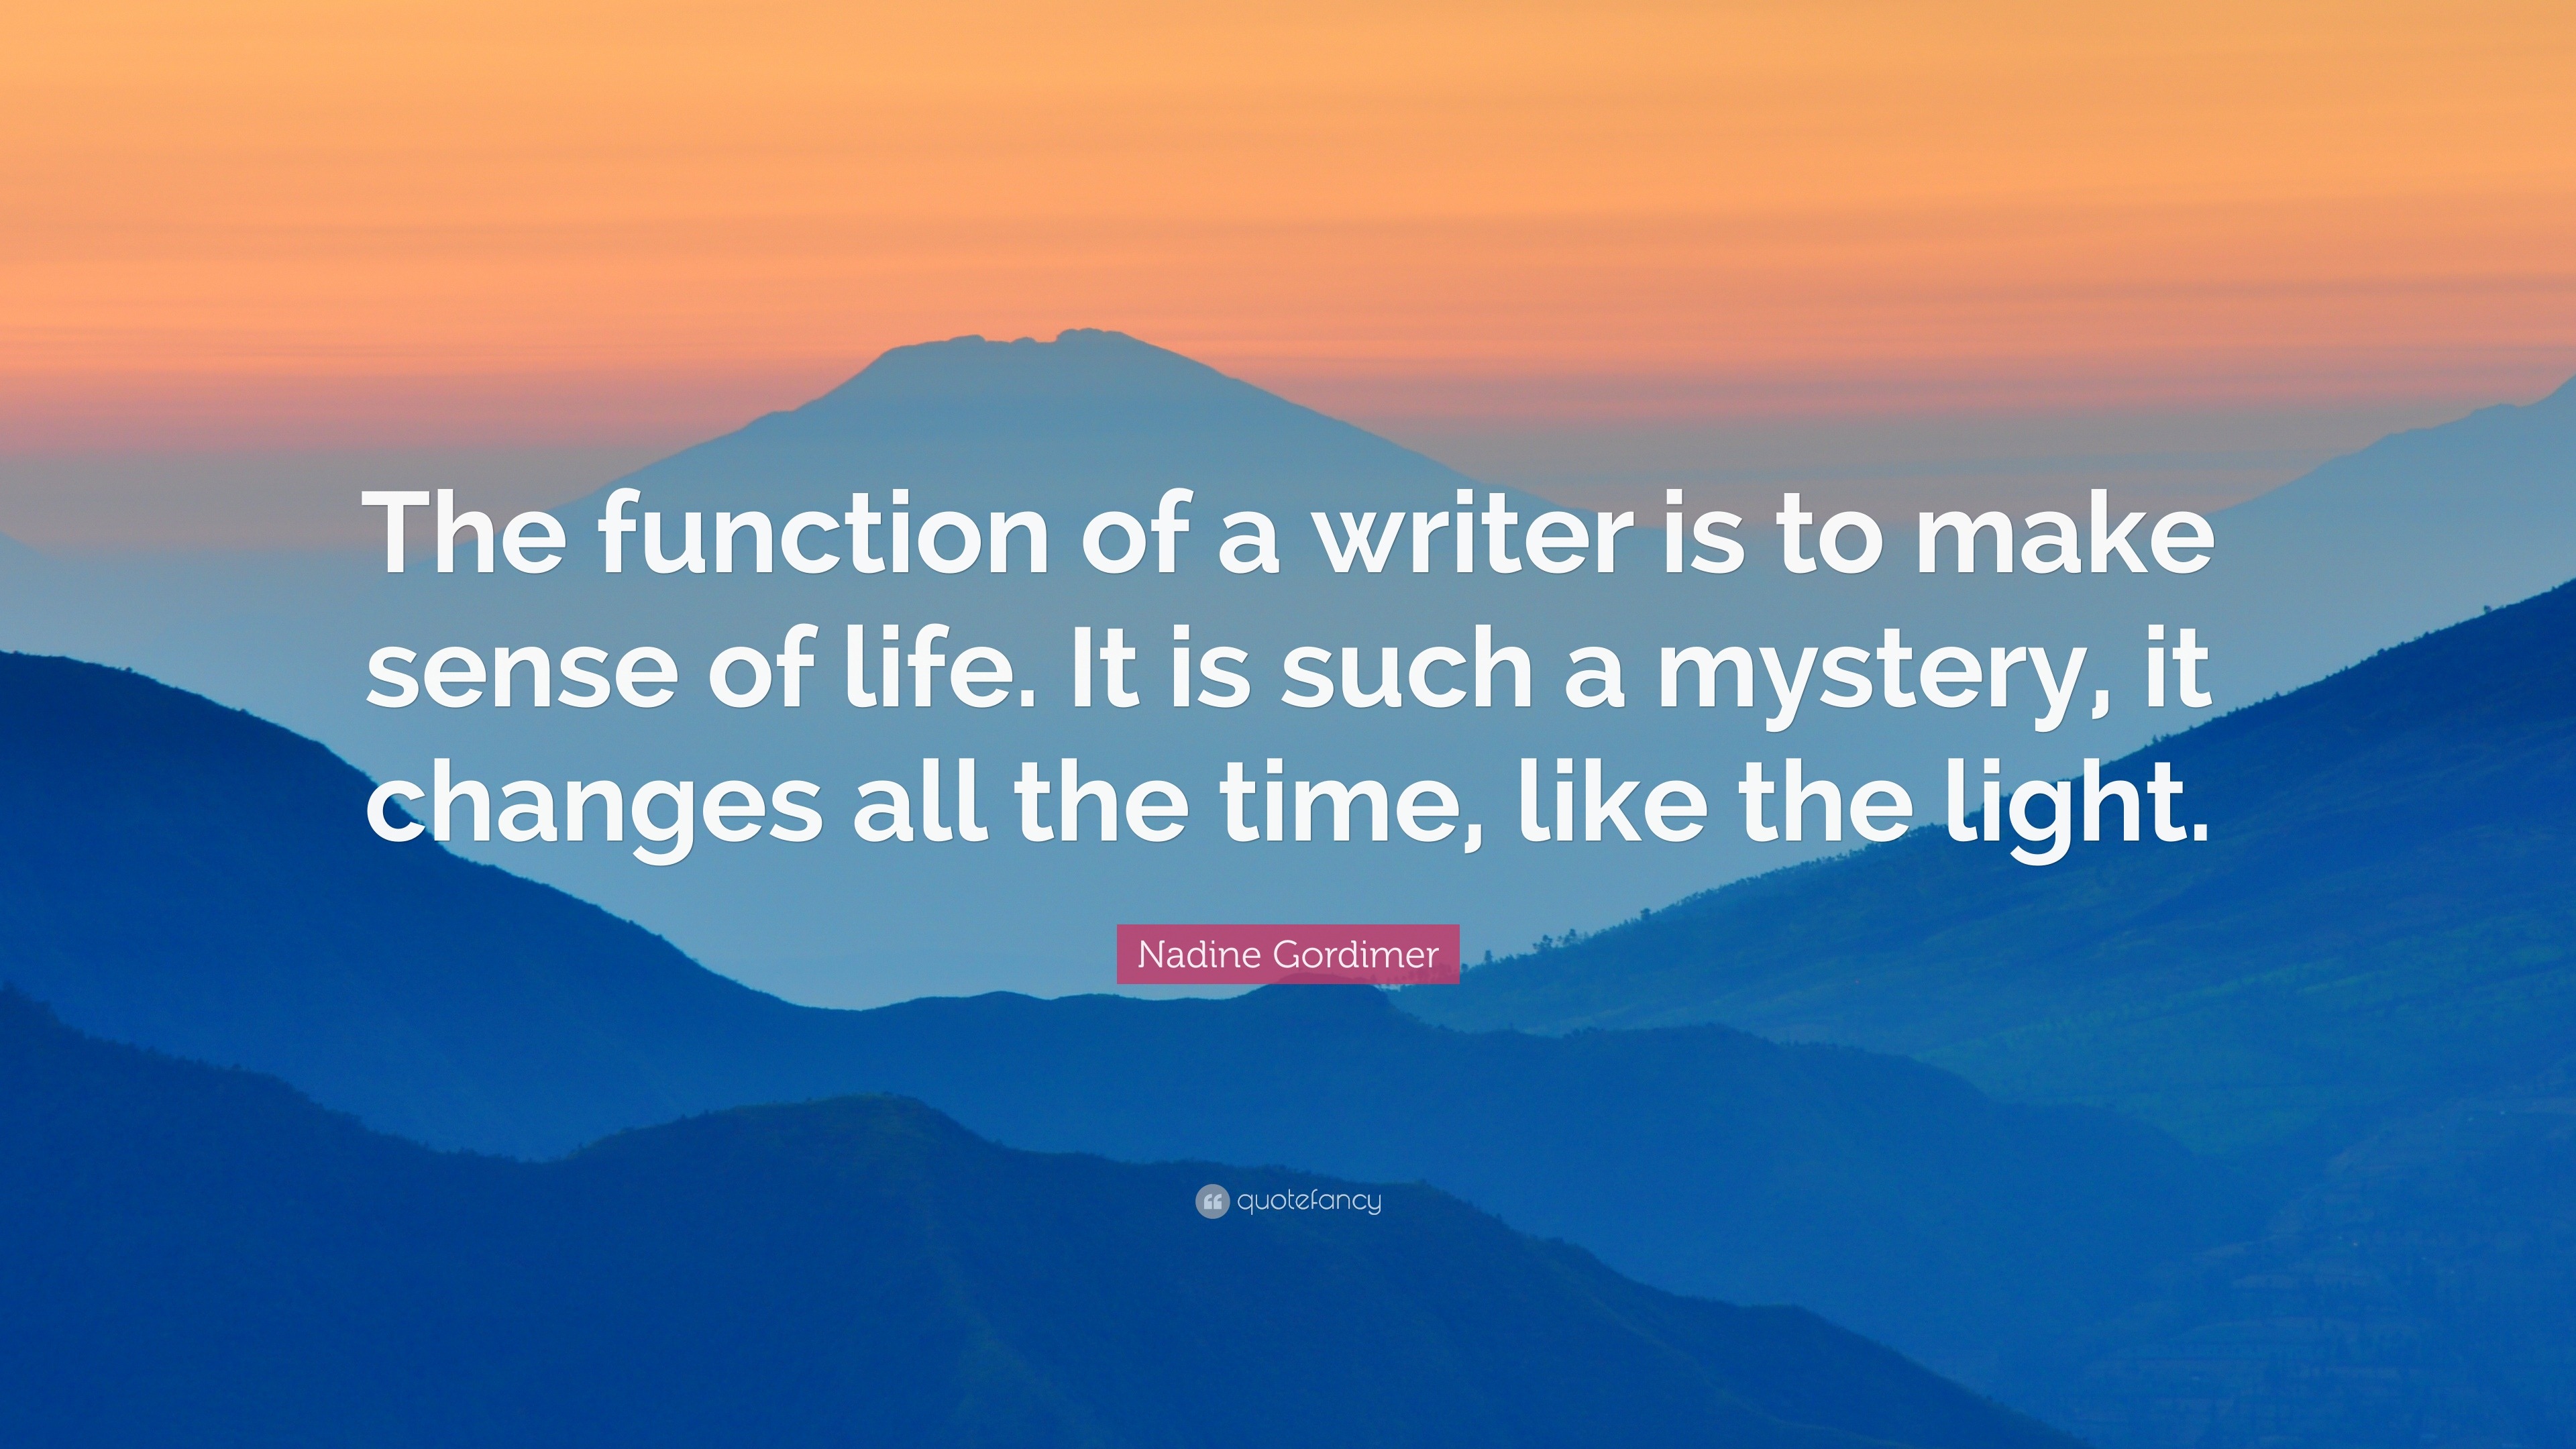 Nadine Gordimer Quote “The function of a writer is to make sense of life